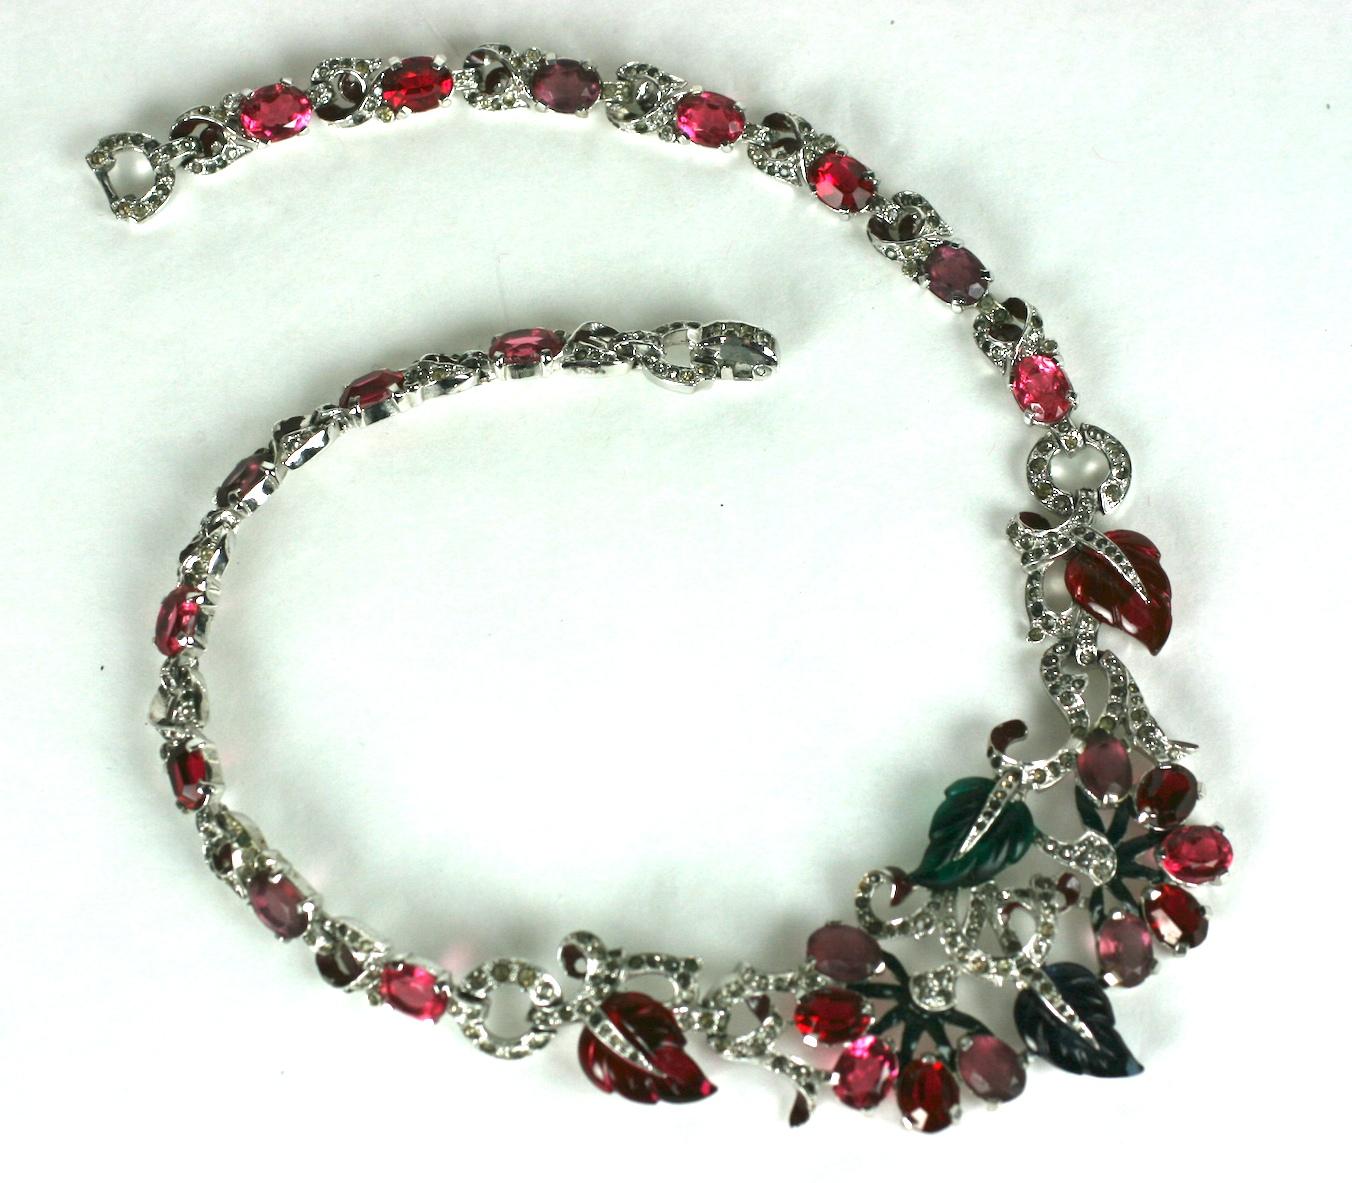 Mazer Fruit Salad Necklace from the 1930's. Elaborate floral designs of amythest, ruby and pale pink paste stones accented with enamel and fruit salad 